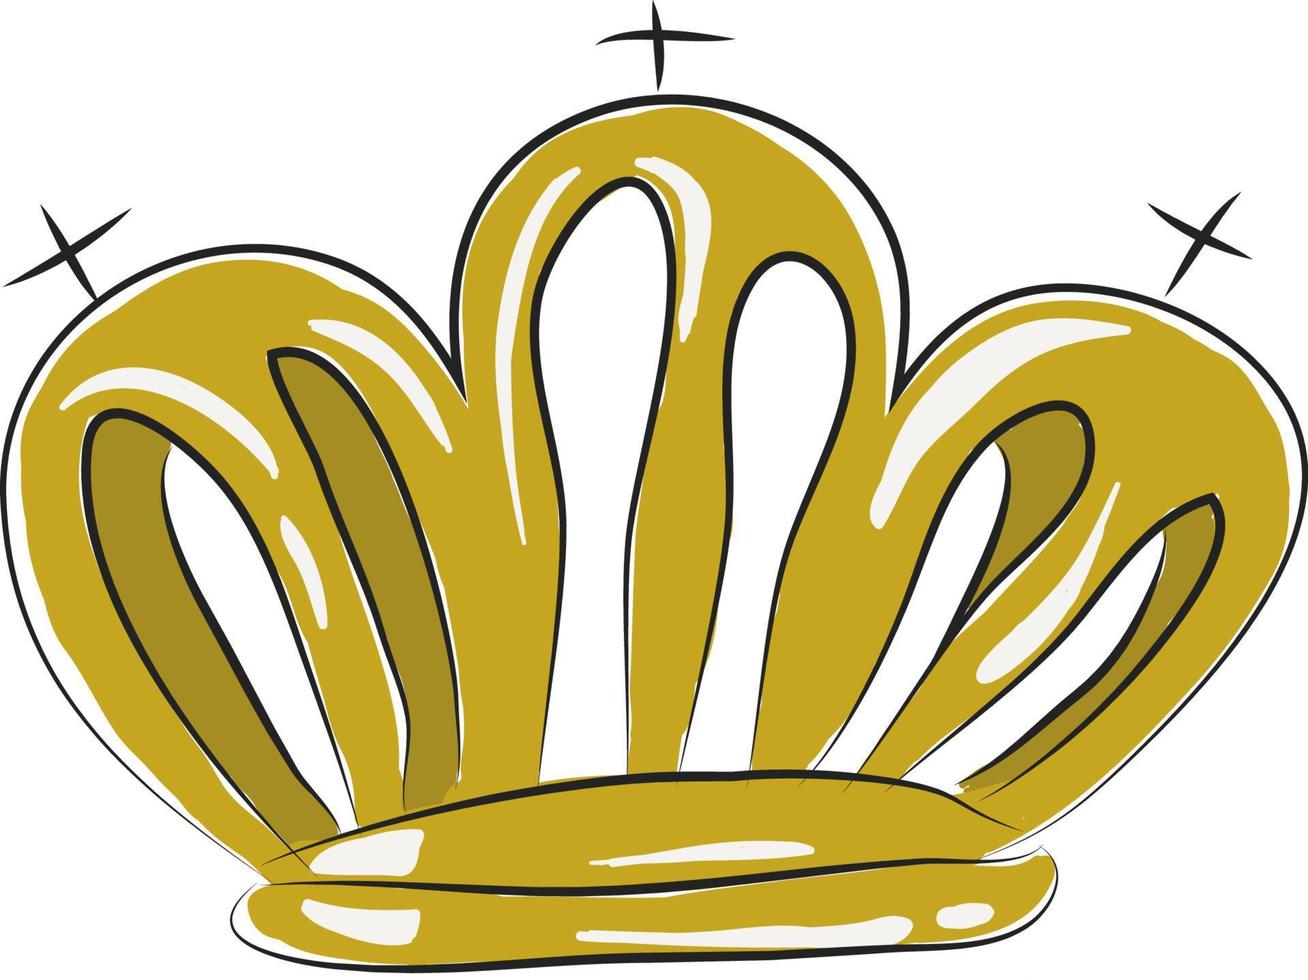 A shinning crown, vector or color illustration.